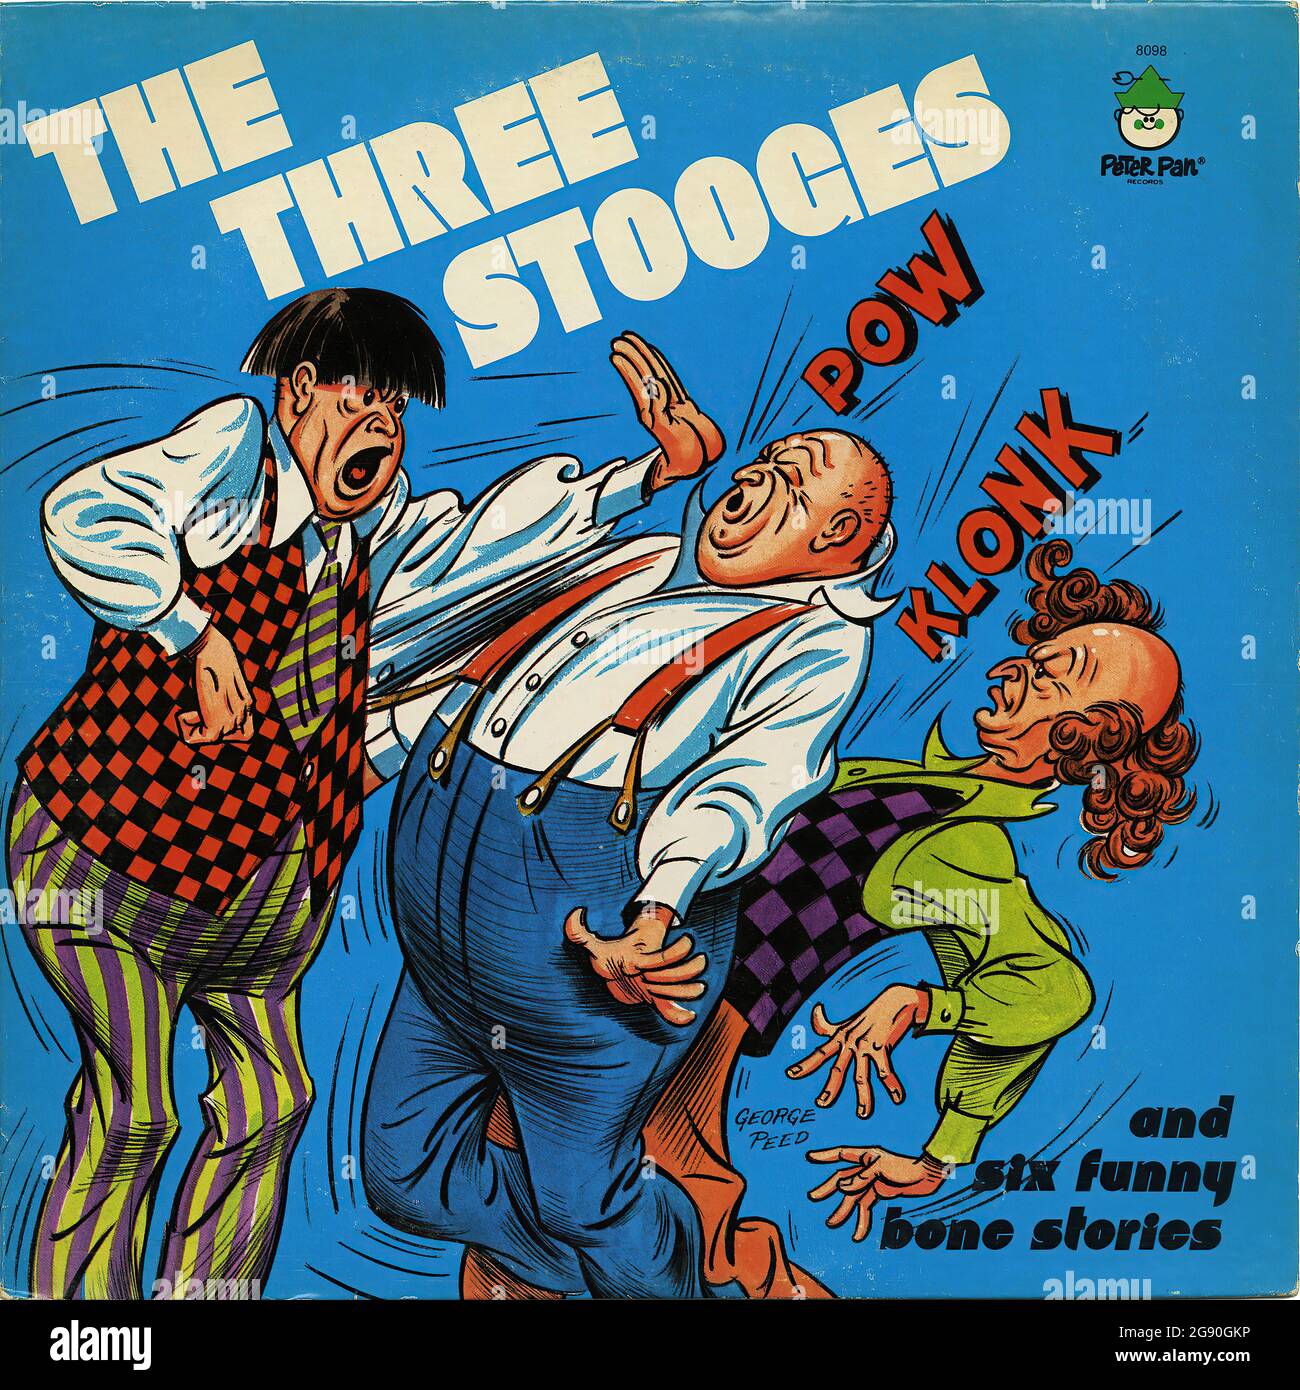 The Three Stooges And Six Funny Bone Stories -  Vintage Vinyl Record Cover Stock Photo